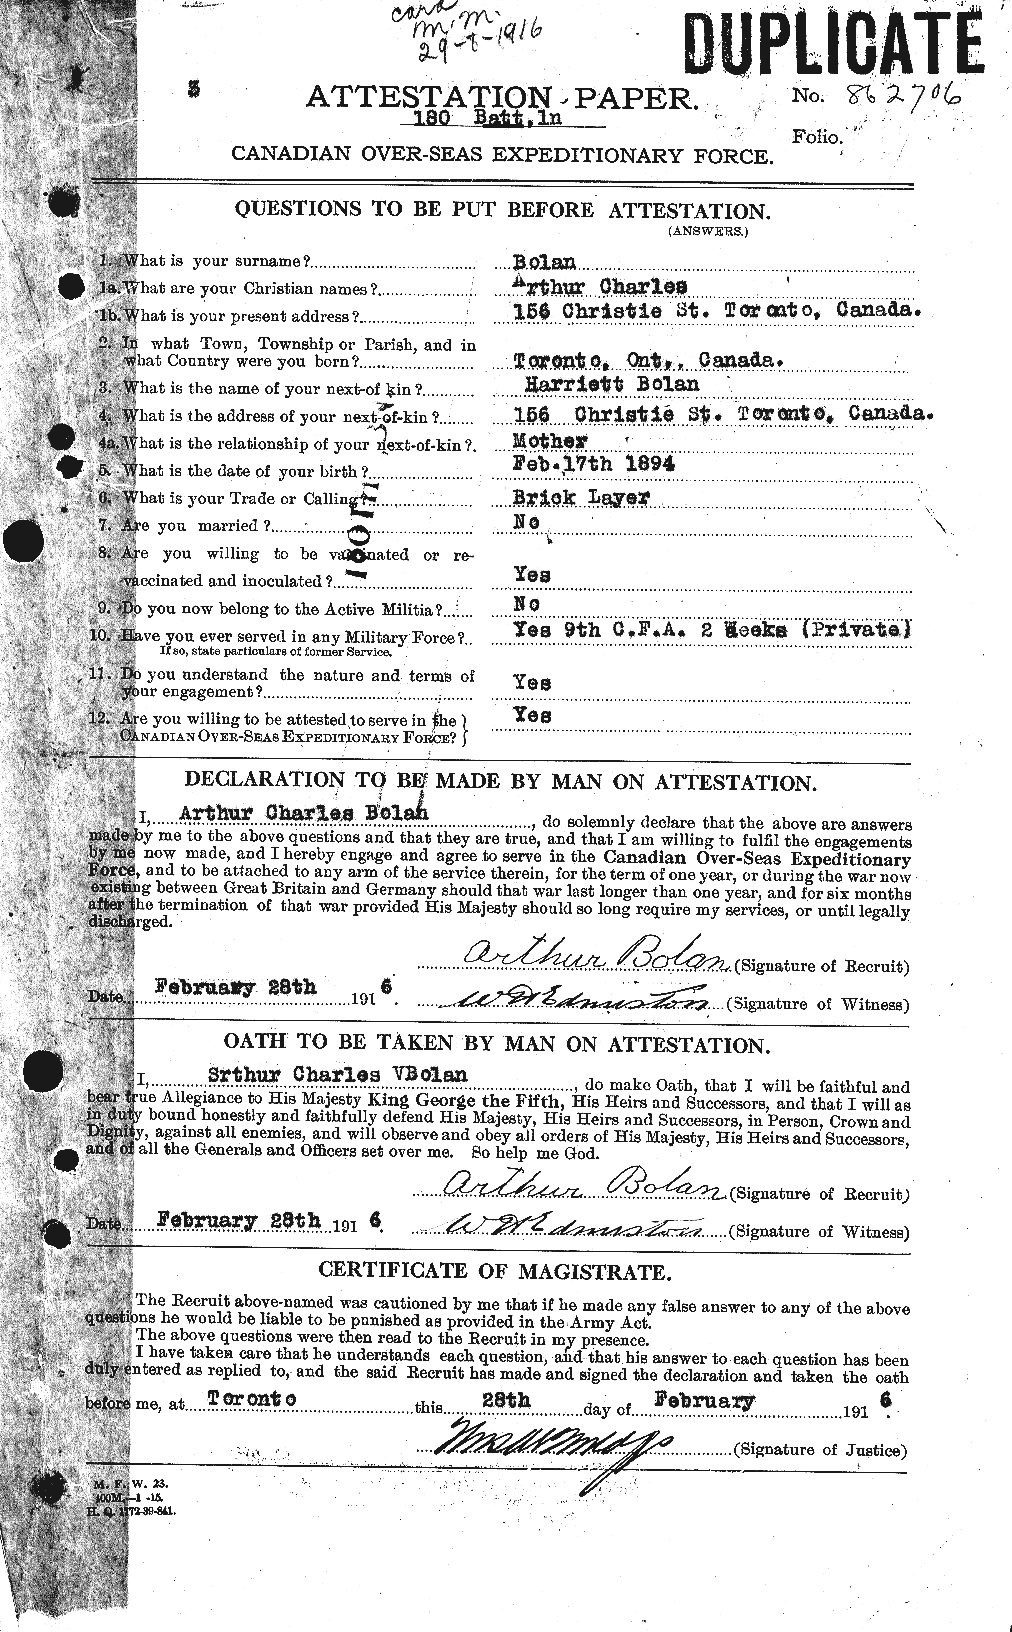 Personnel Records of the First World War - CEF 249504a